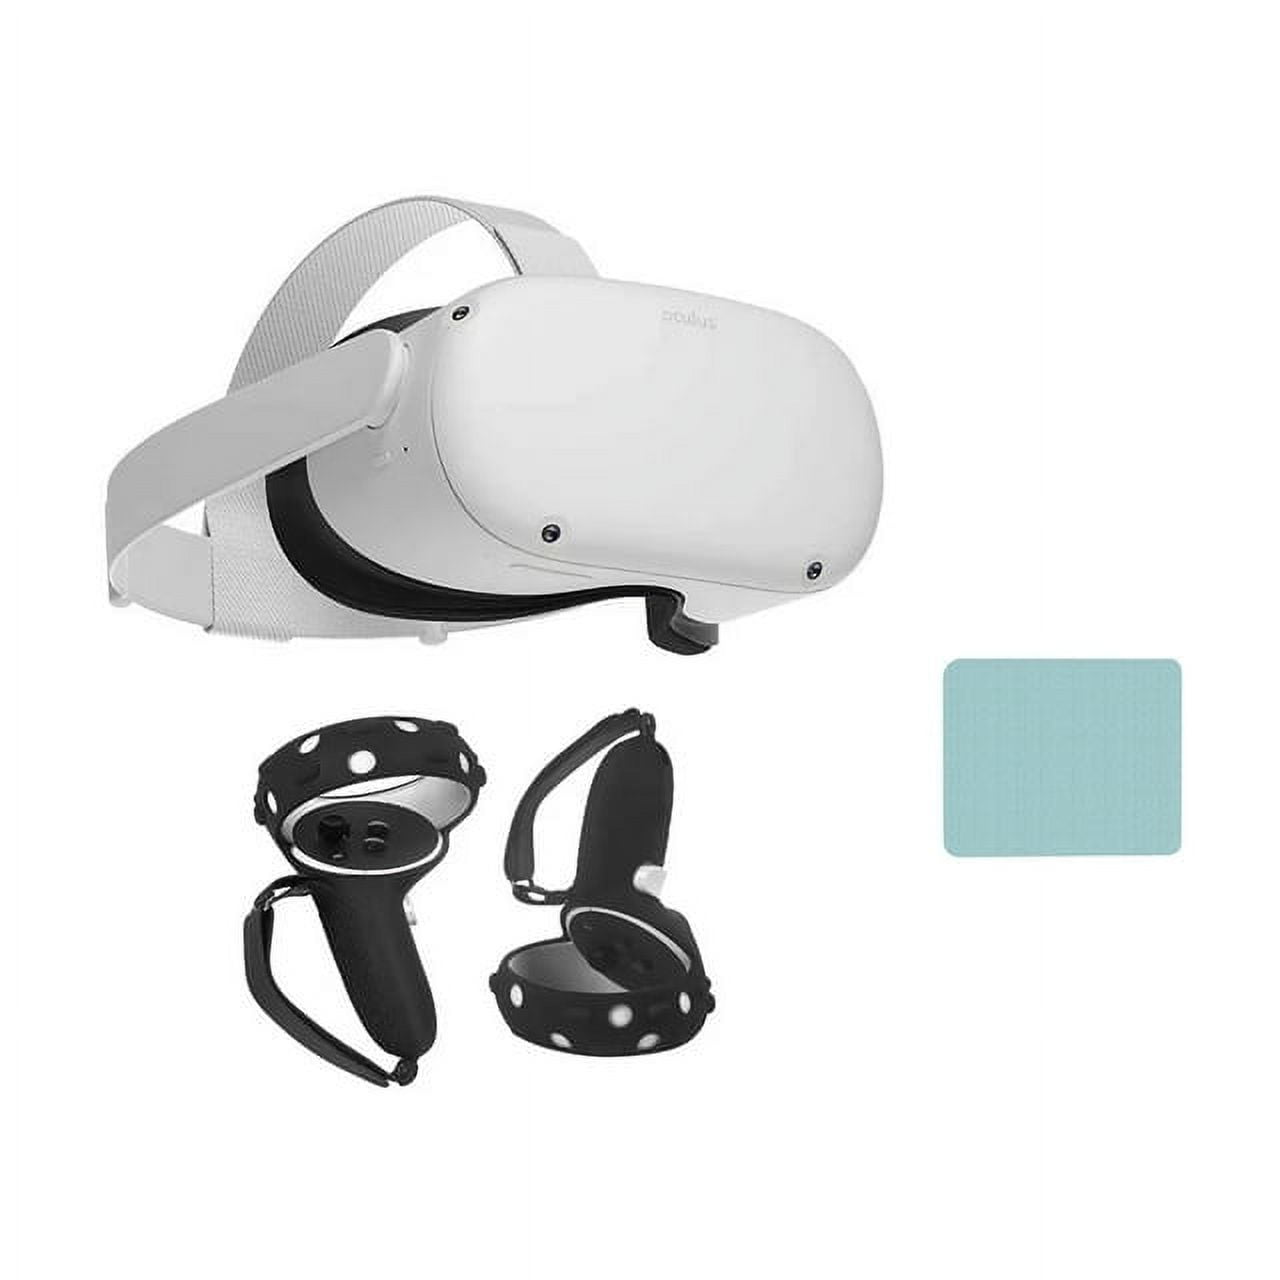 Oculus from Lenovo - VR Headsets & Accessories